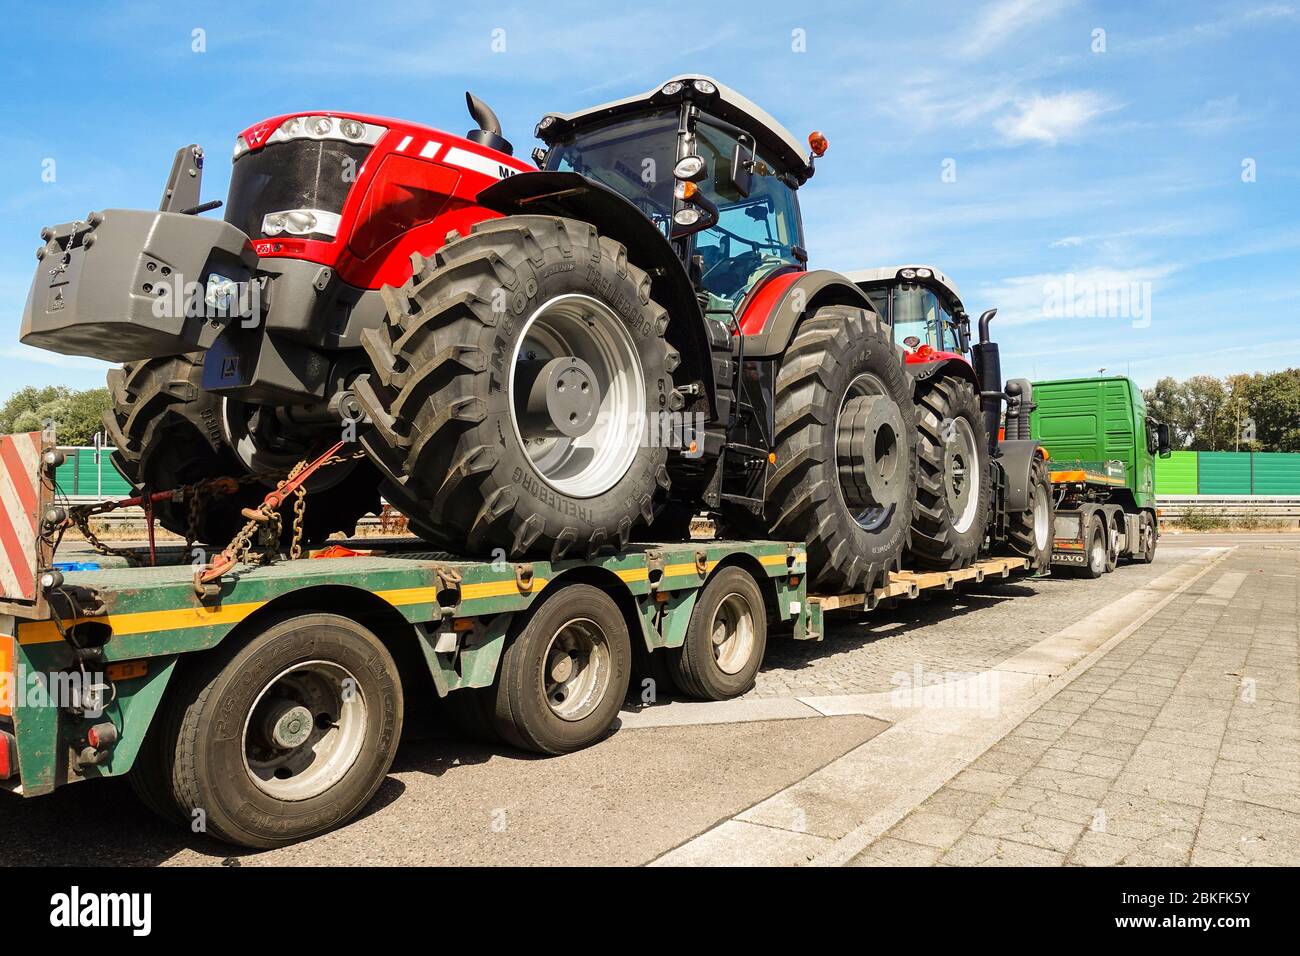 AACHEN, NRW, GERMANY - JULY 27, 2018: Heavy haulage of big tractors on a special low-loader trailer truck, parking road sight on a highway Stock Photo